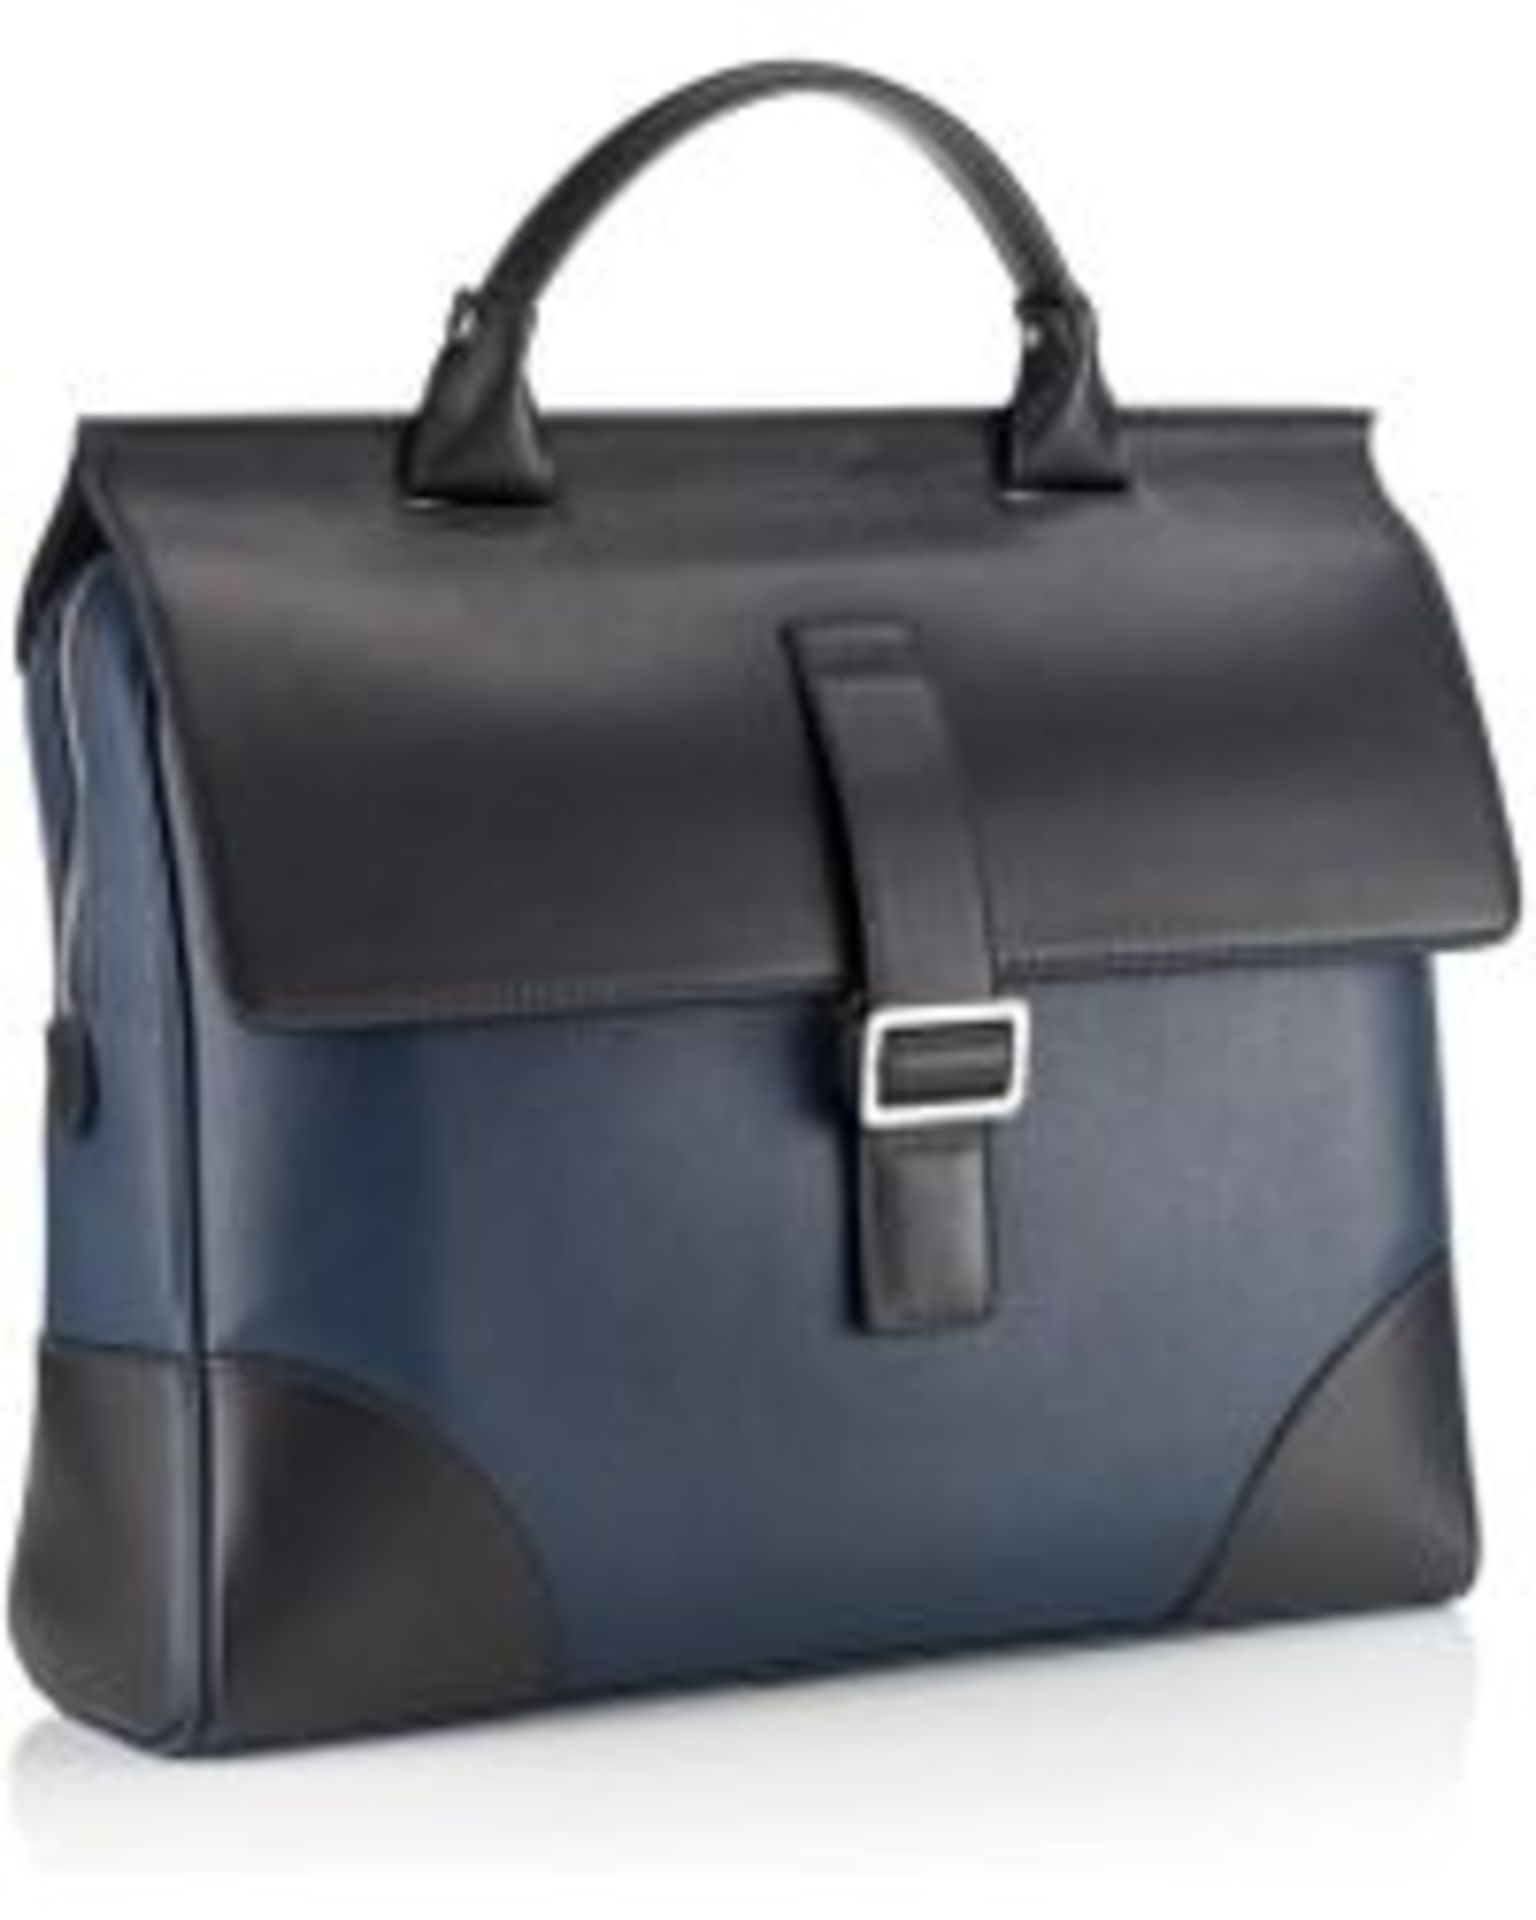 MILANO NAPPA LEATHER BRIEFCASE This briefcase is made to carry your laptop first and foremost,